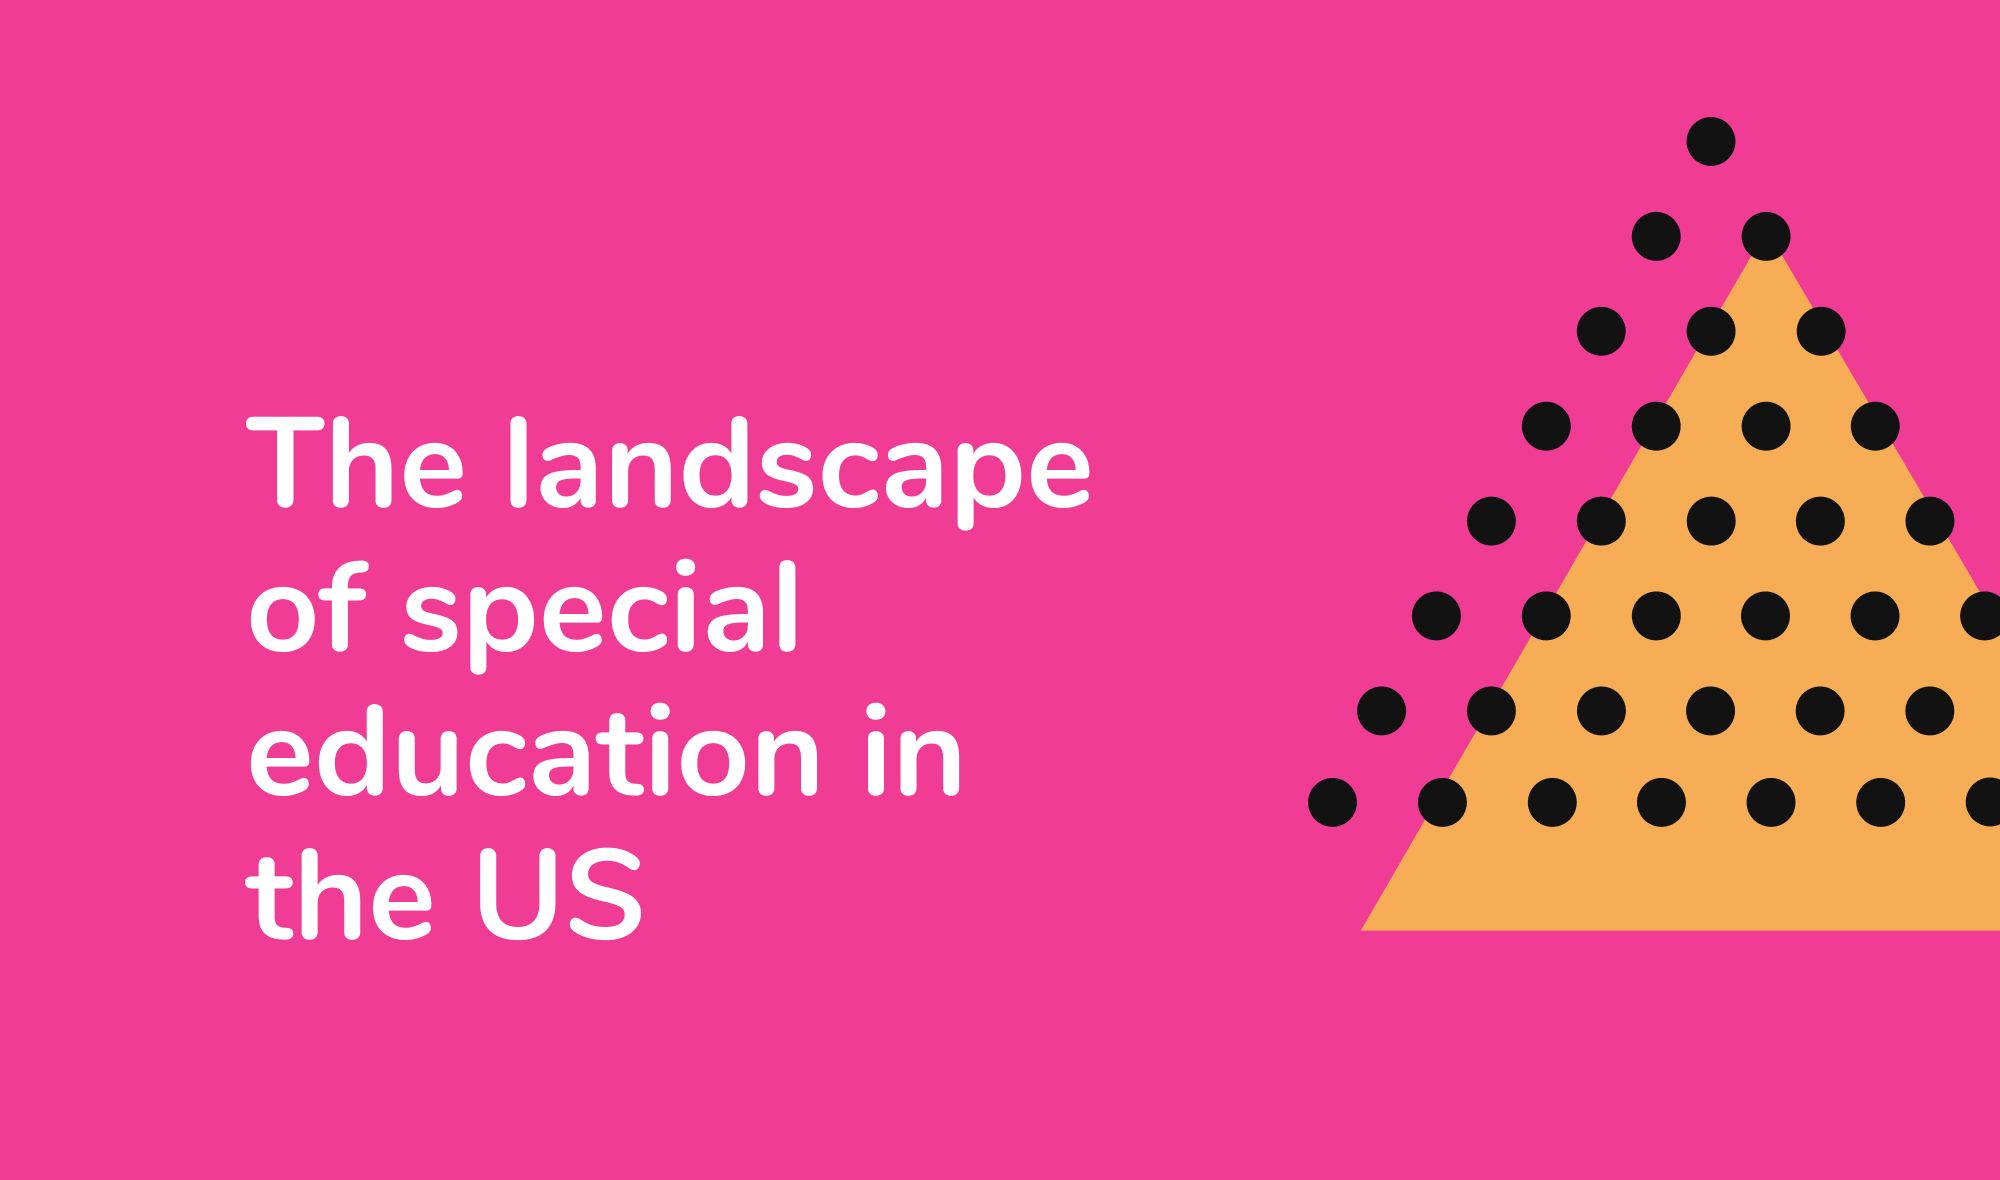 The landscape of special education in the United States